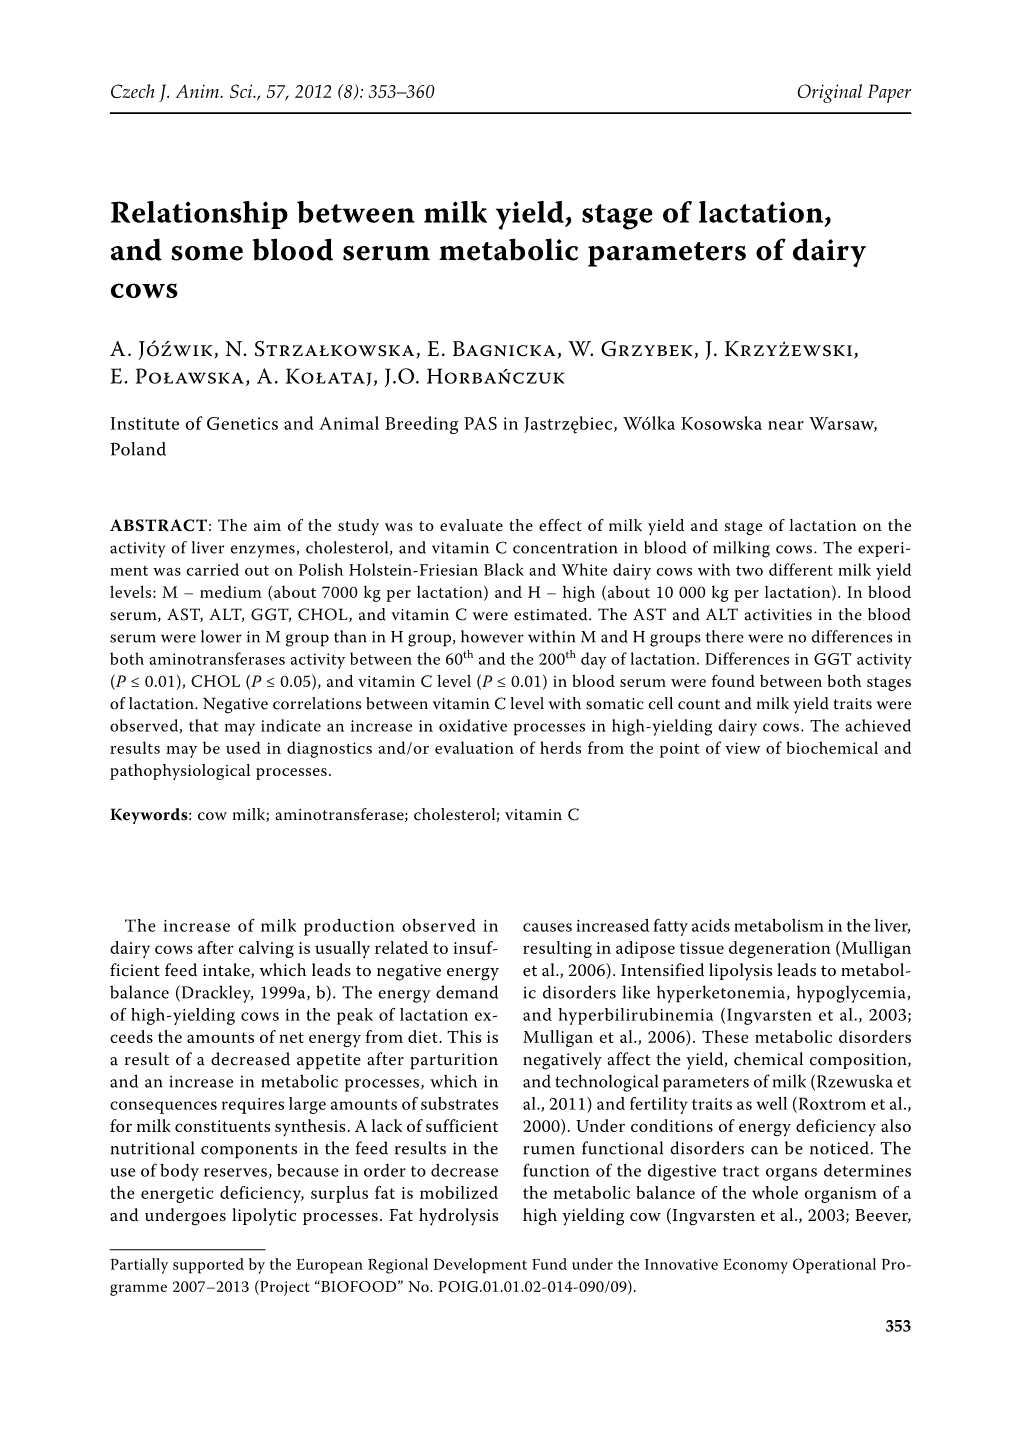 Relationship Between Milk Yield, Stage of Lactation, and Some Blood Serum Metabolic Parameters of Dairy Cows